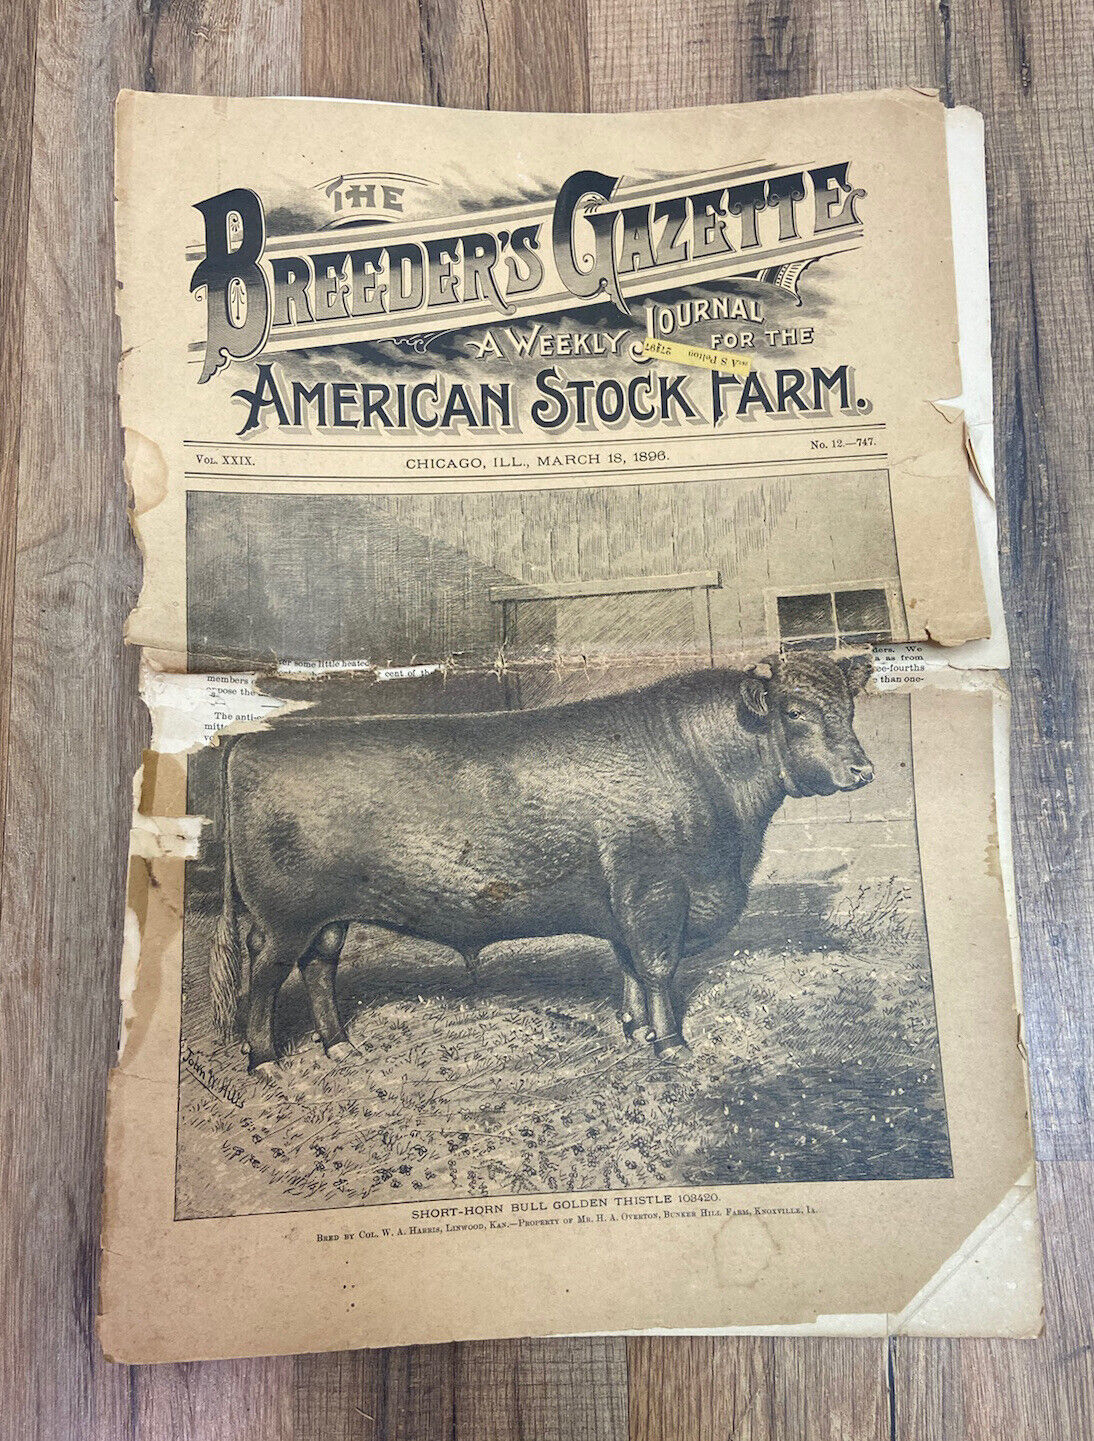 March 18, 1896 The Breeder’s Gazette Weekly Journal American Stock Farm Antique